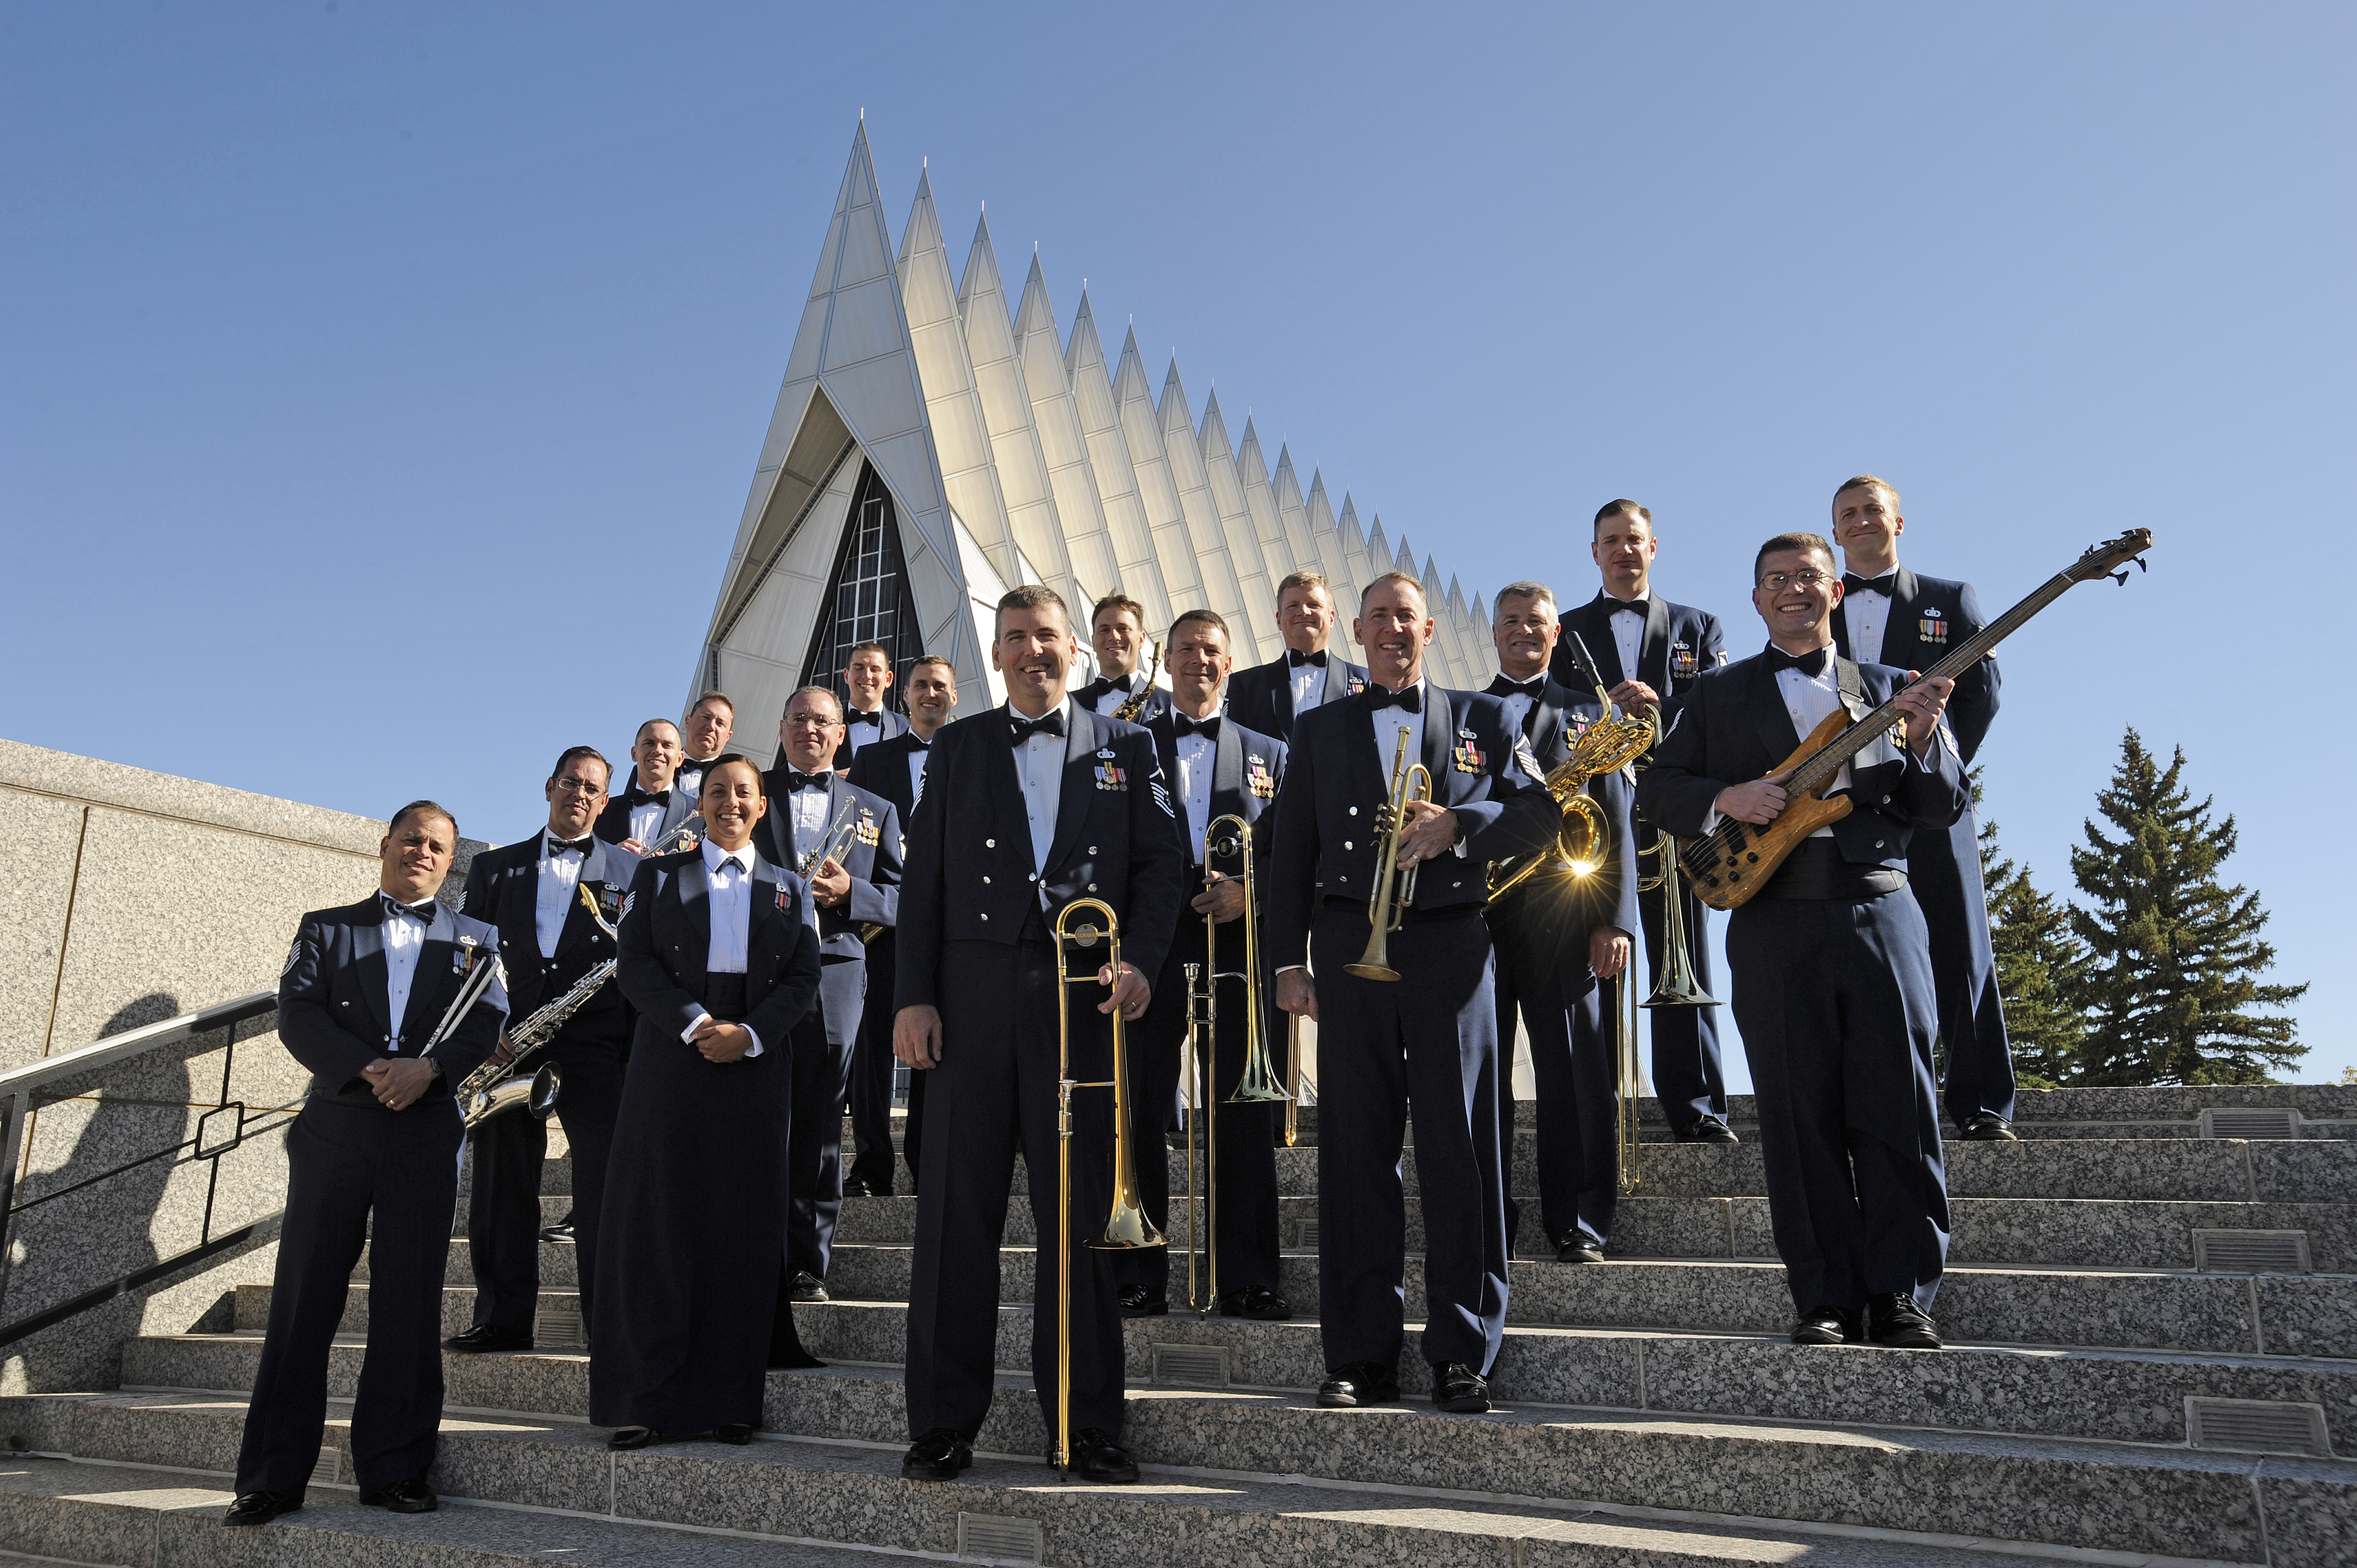 The Falconaires at the Air Force Academy. U.S. Air Force